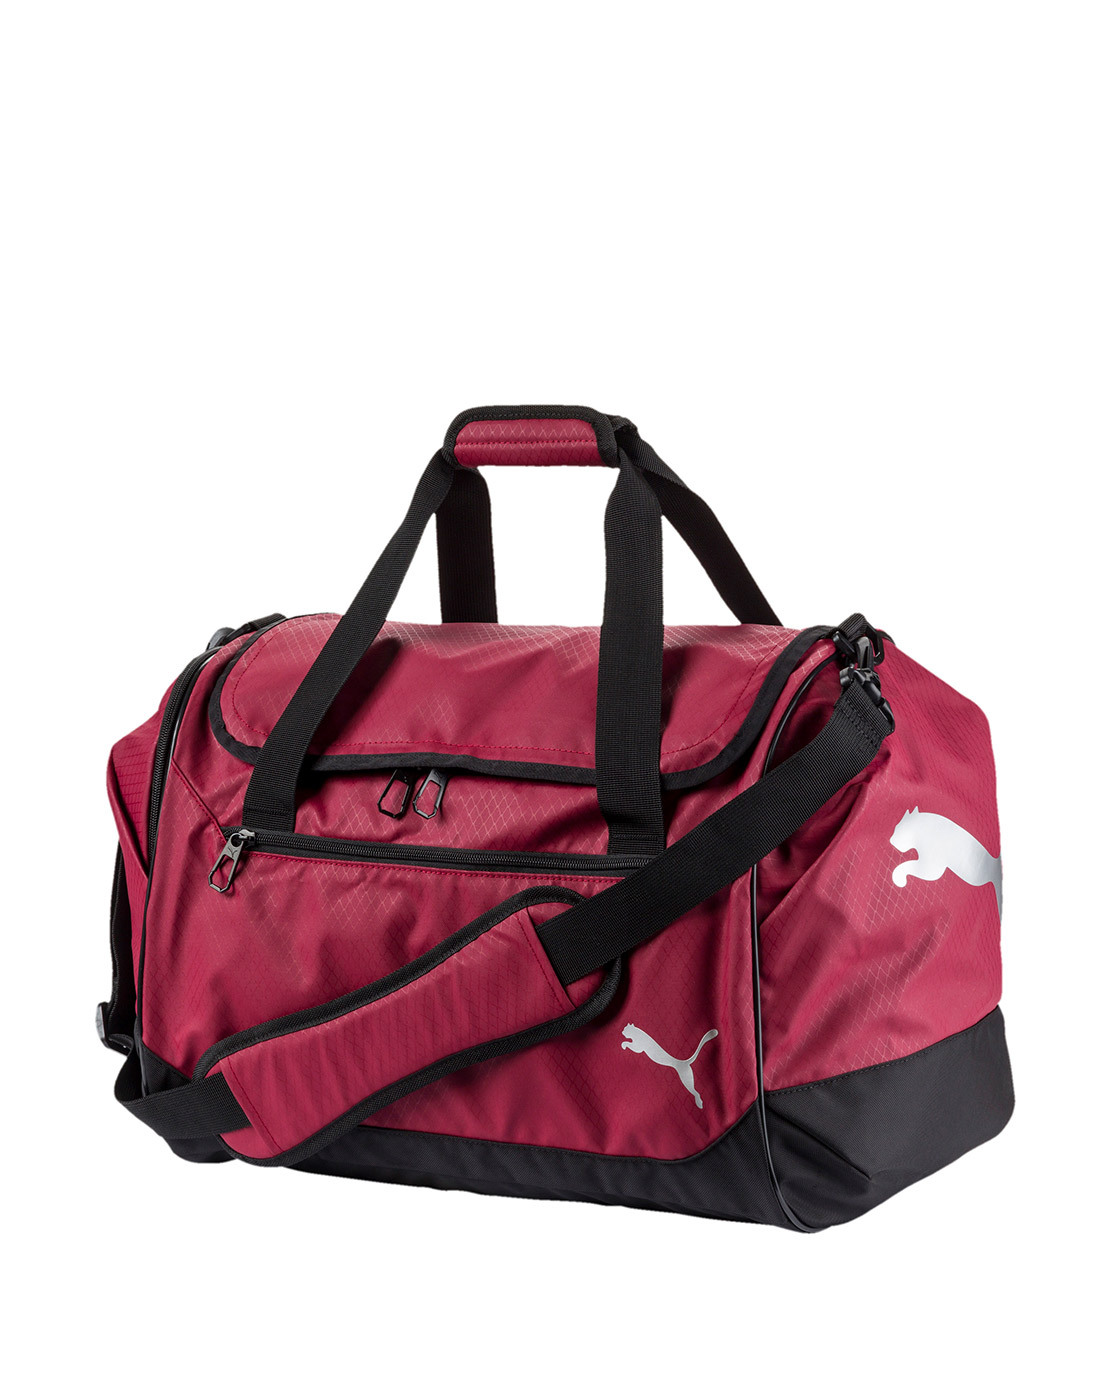 Polyester Puma Travel Backpack Number Of Compartments 3 Bag Capacity 20L